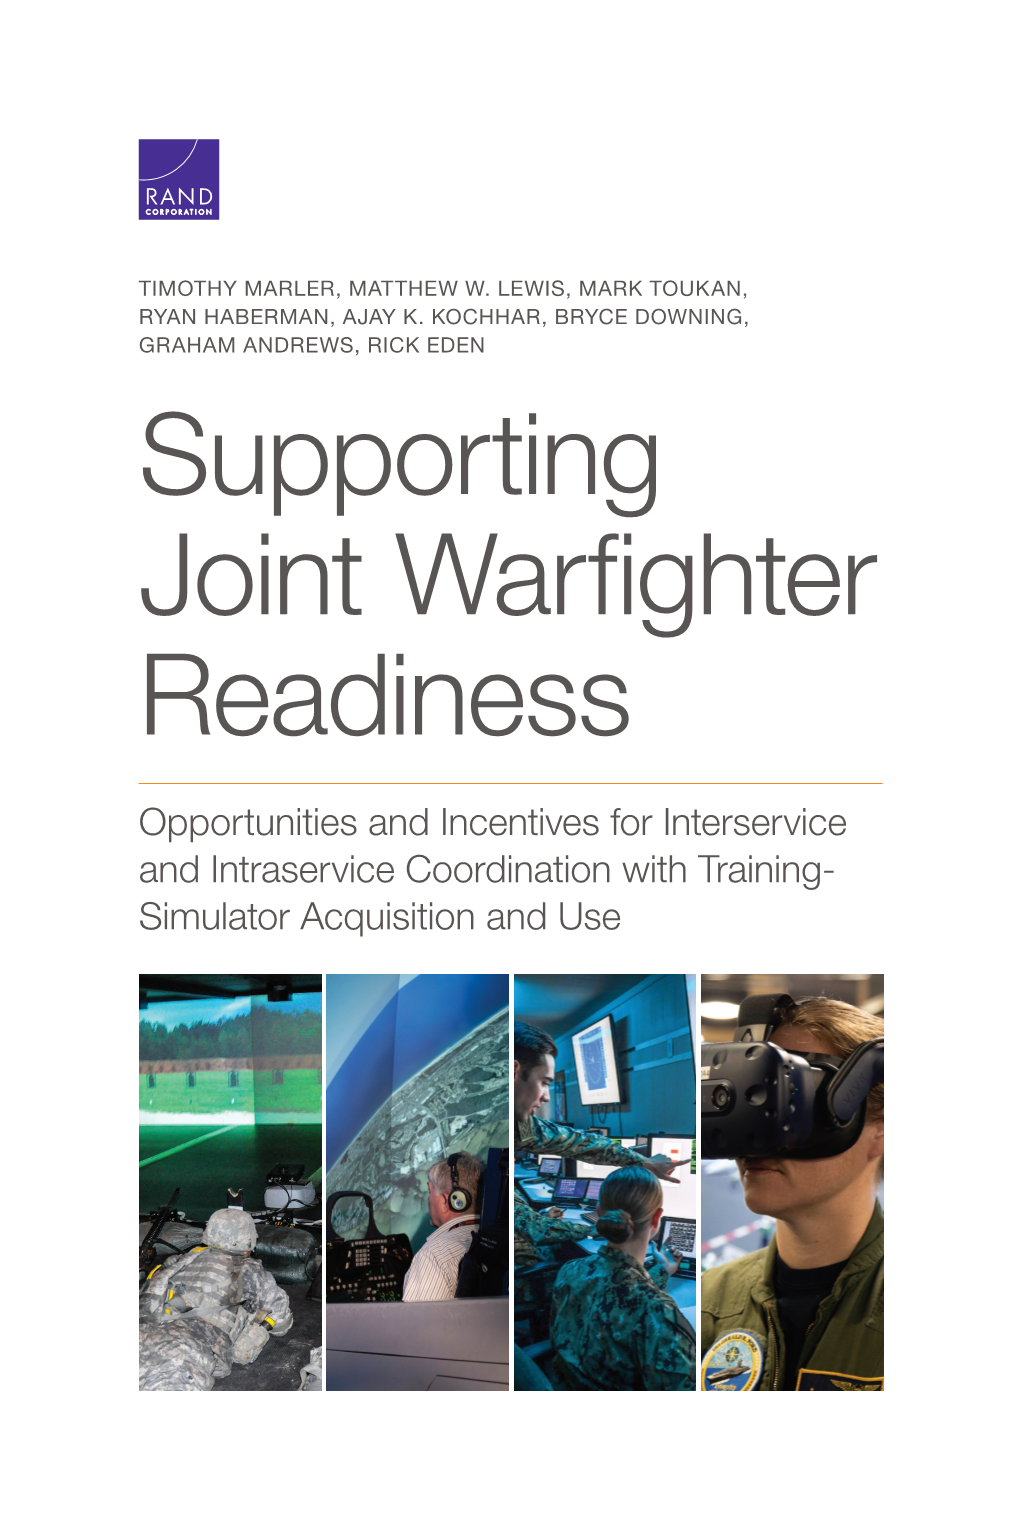 Supporting Joint Warfighter Readiness